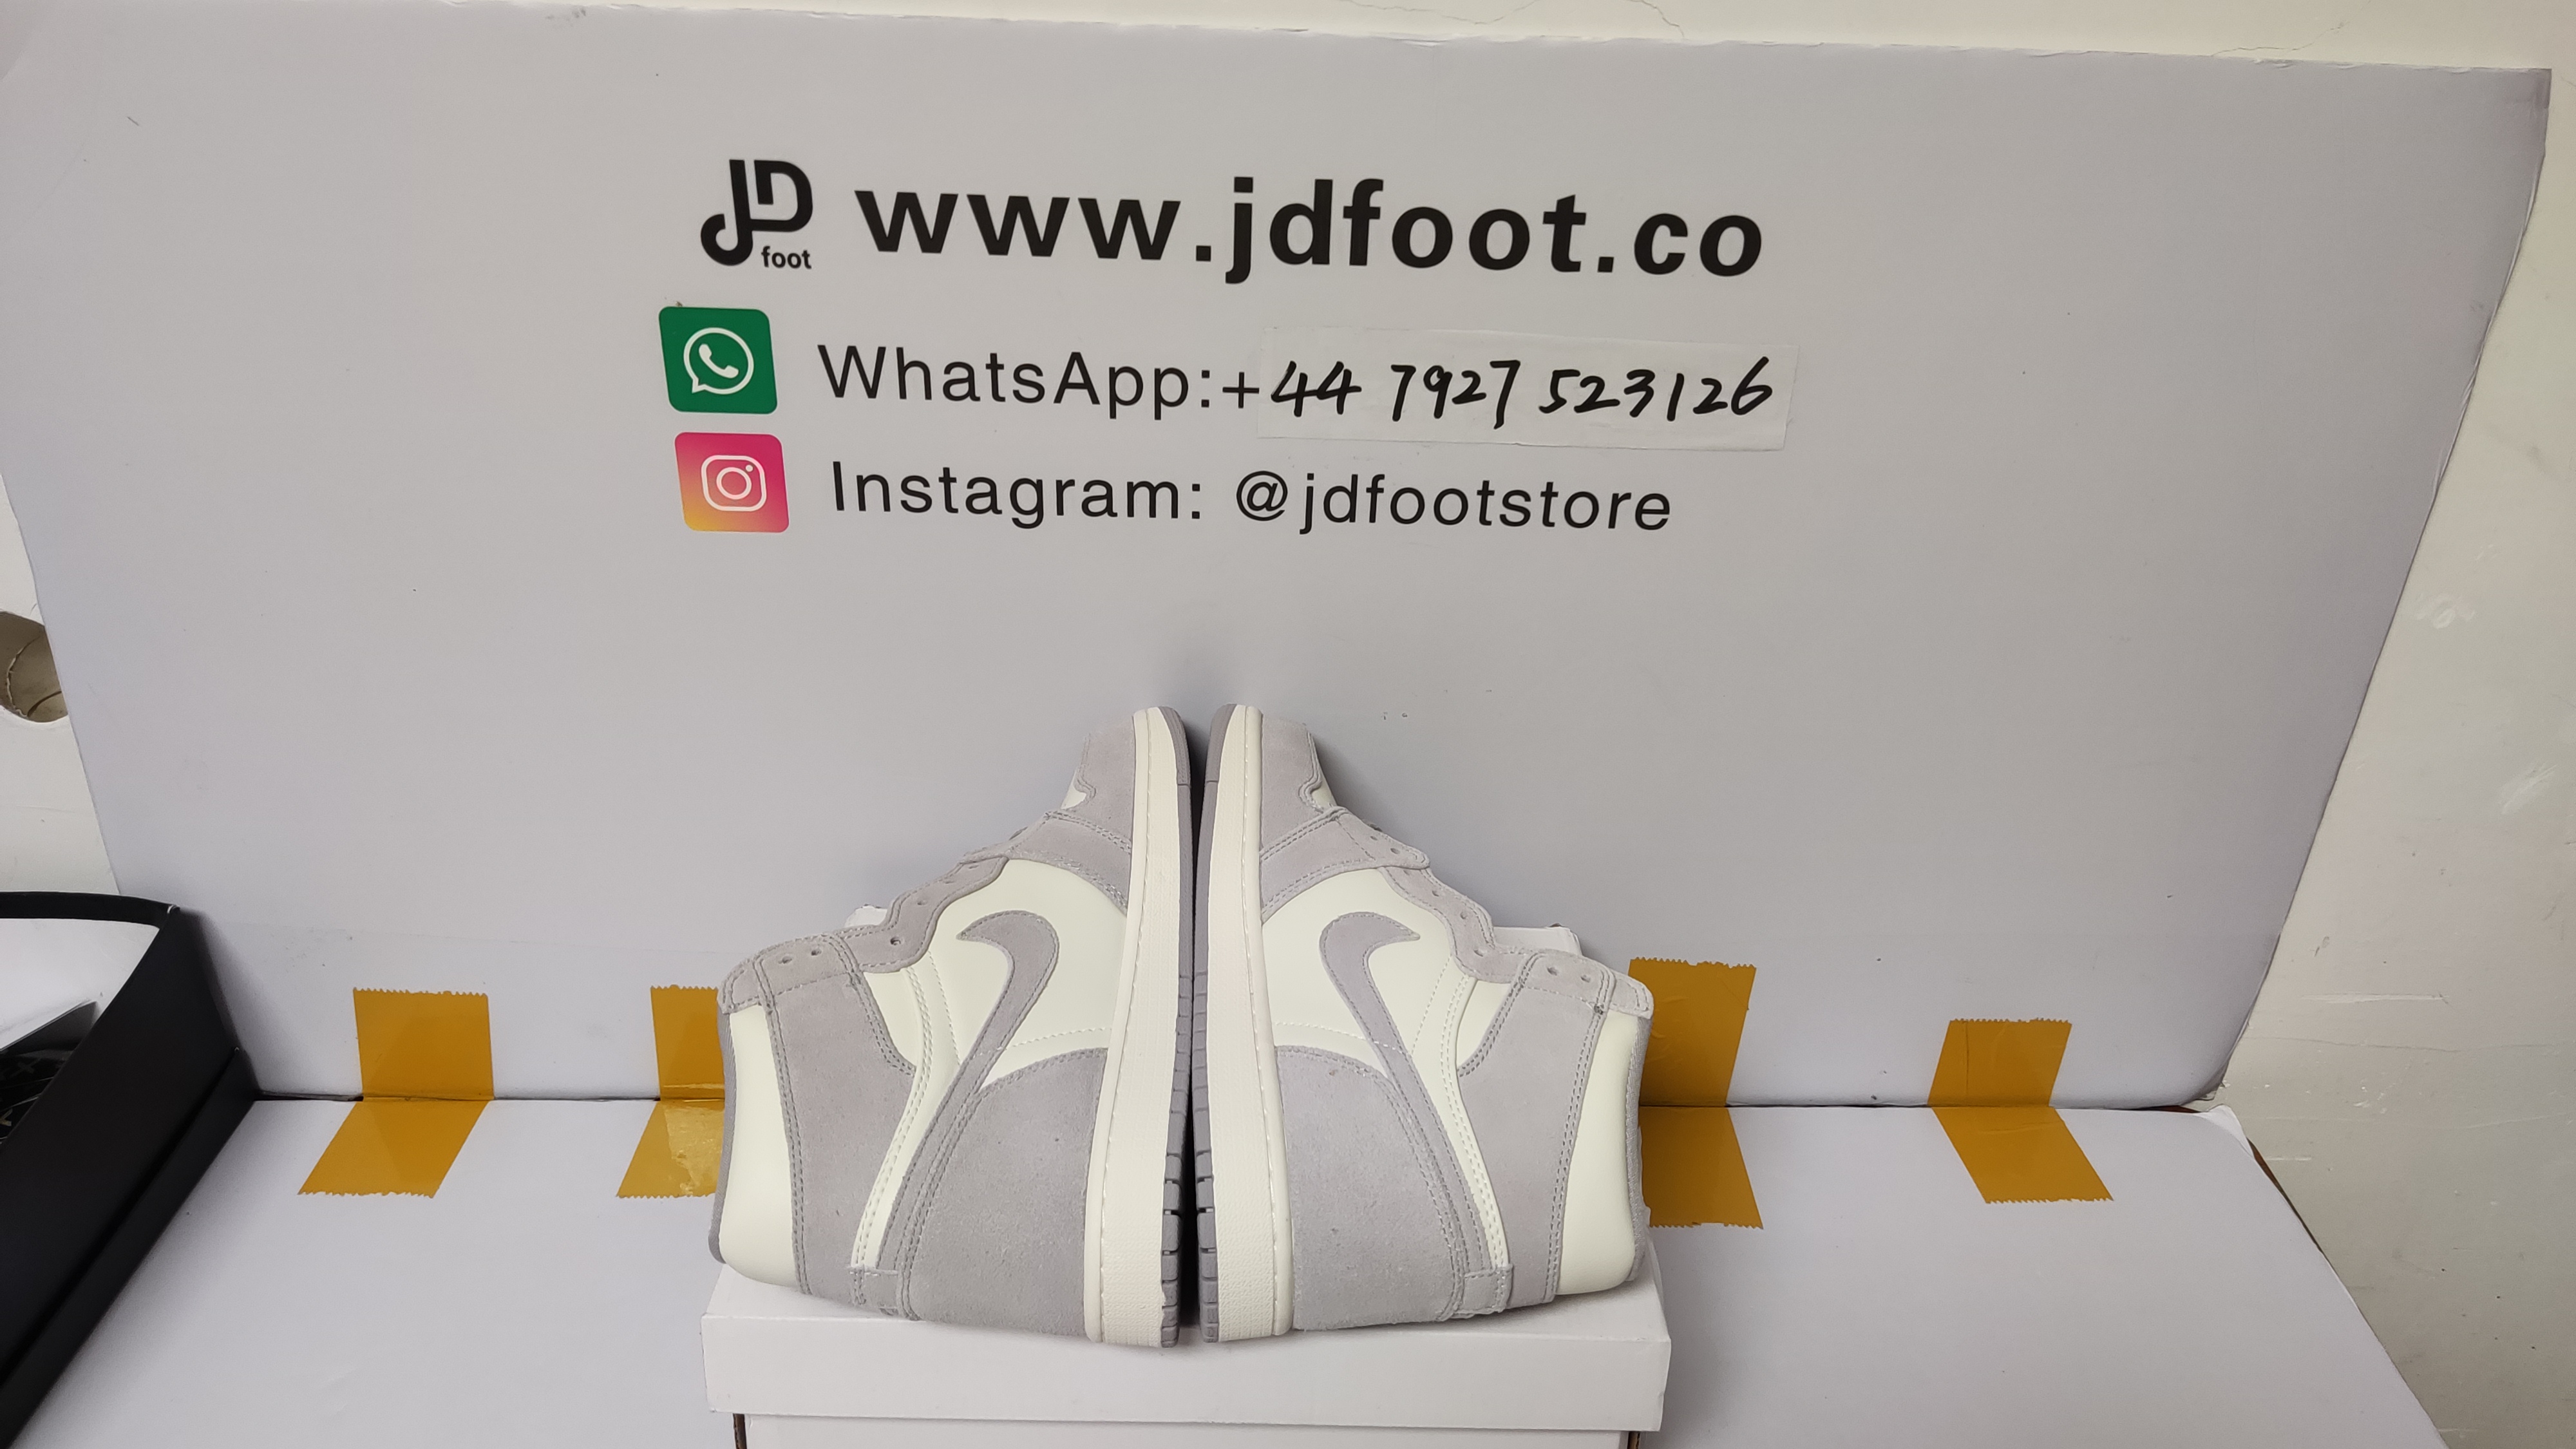 QC Picture Replica ordan 1 Retro High Pale Ivory From Jdfoot